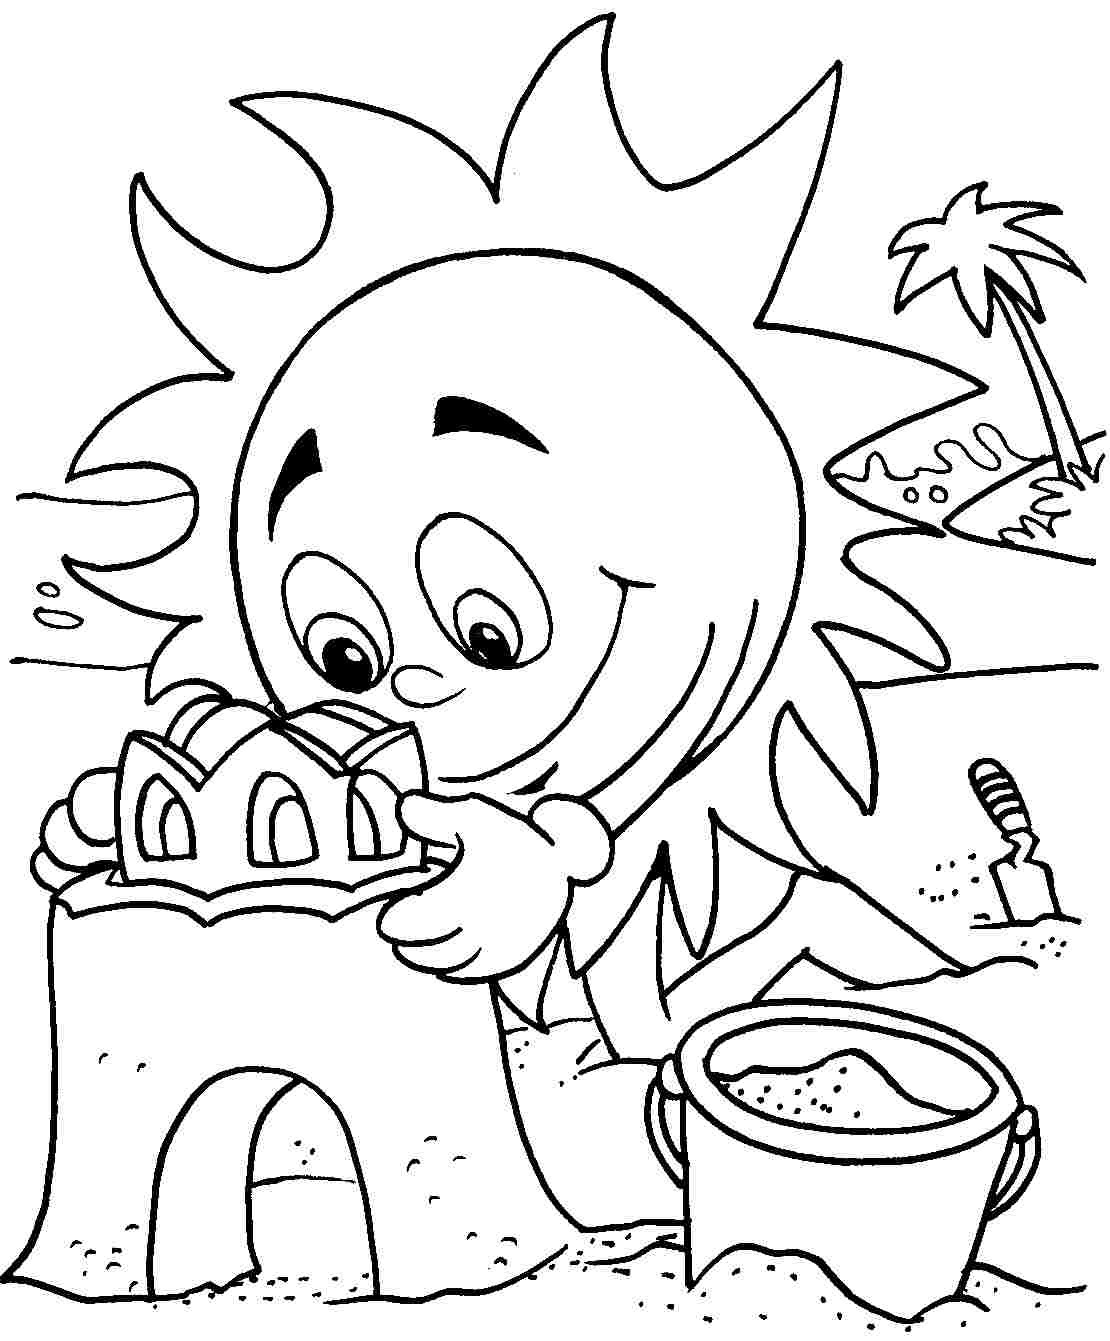 Summer Coloring Pages To Print
 Summer Drawing For Kids at GetDrawings